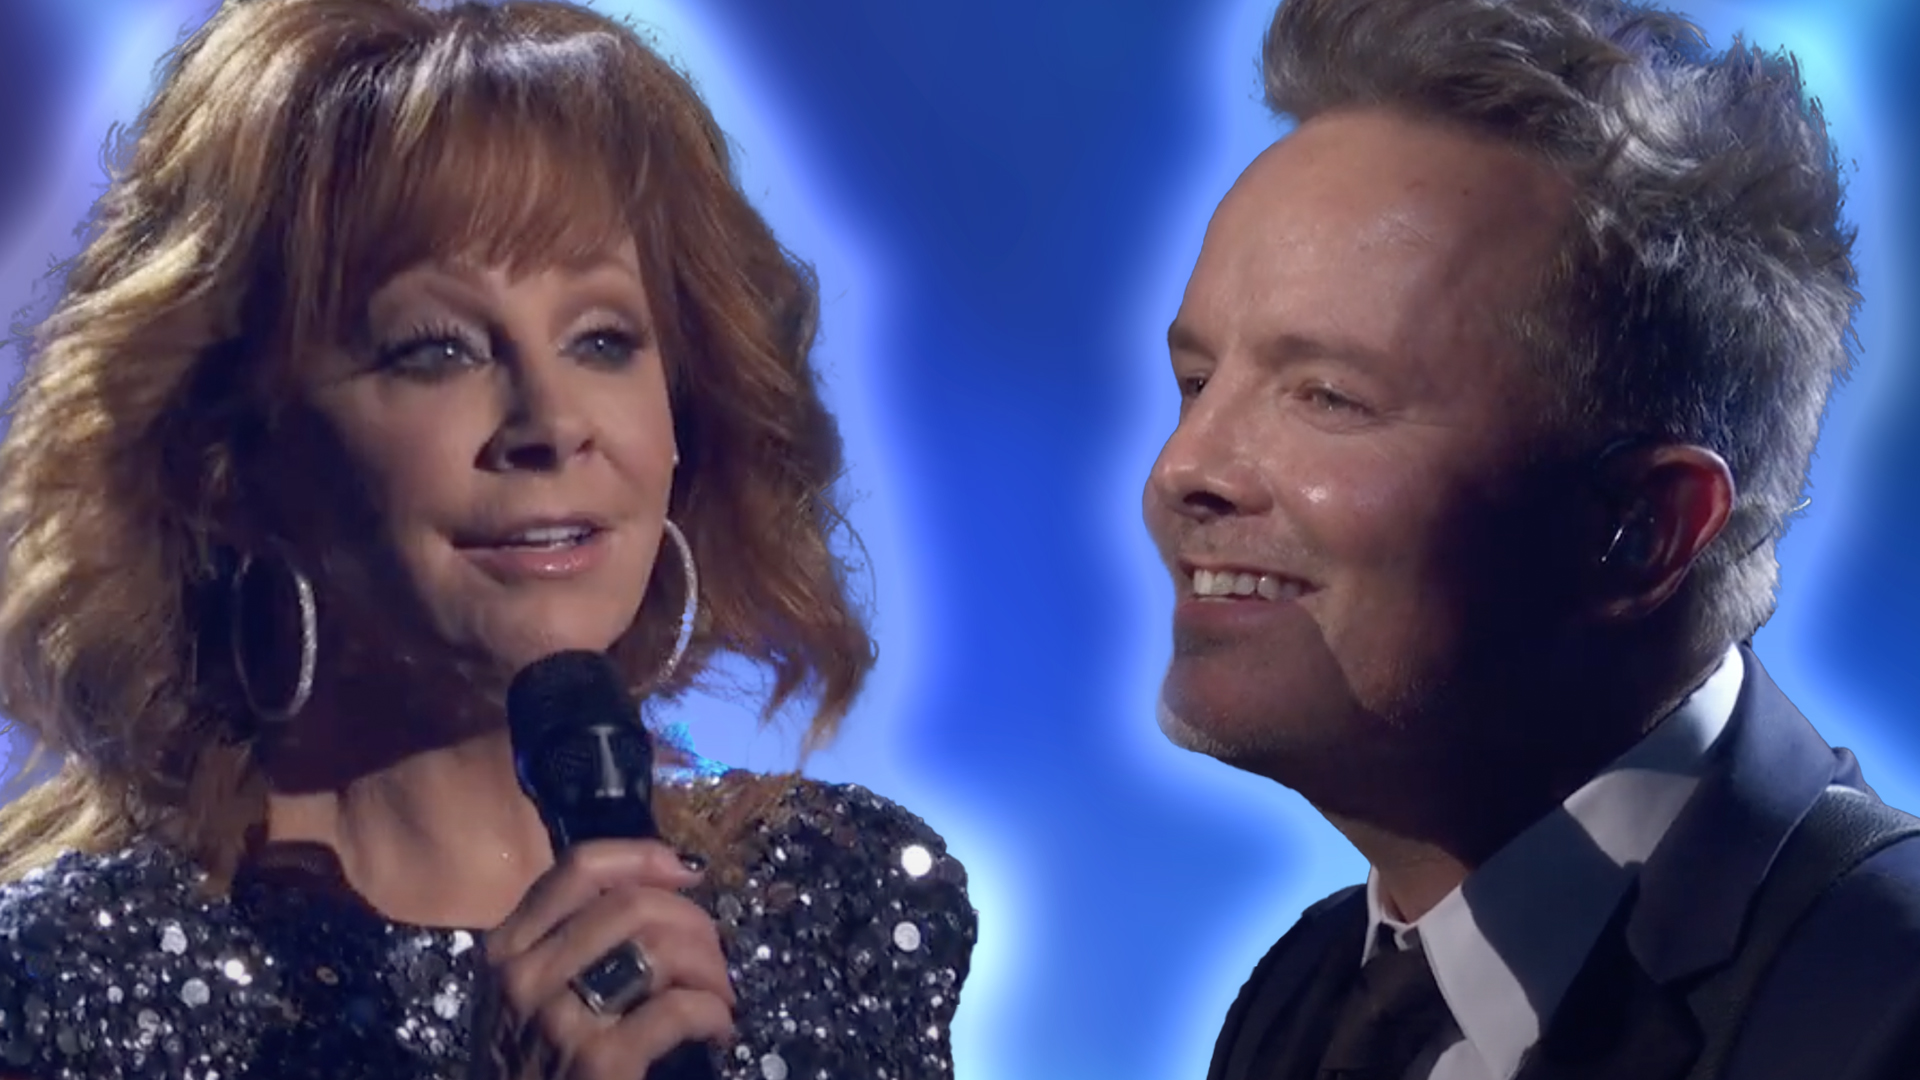 Reba McEntire & Chris Tomlin perform together with Thomas Rhett at the 2020 Country Music Awards CMA's Be a Light